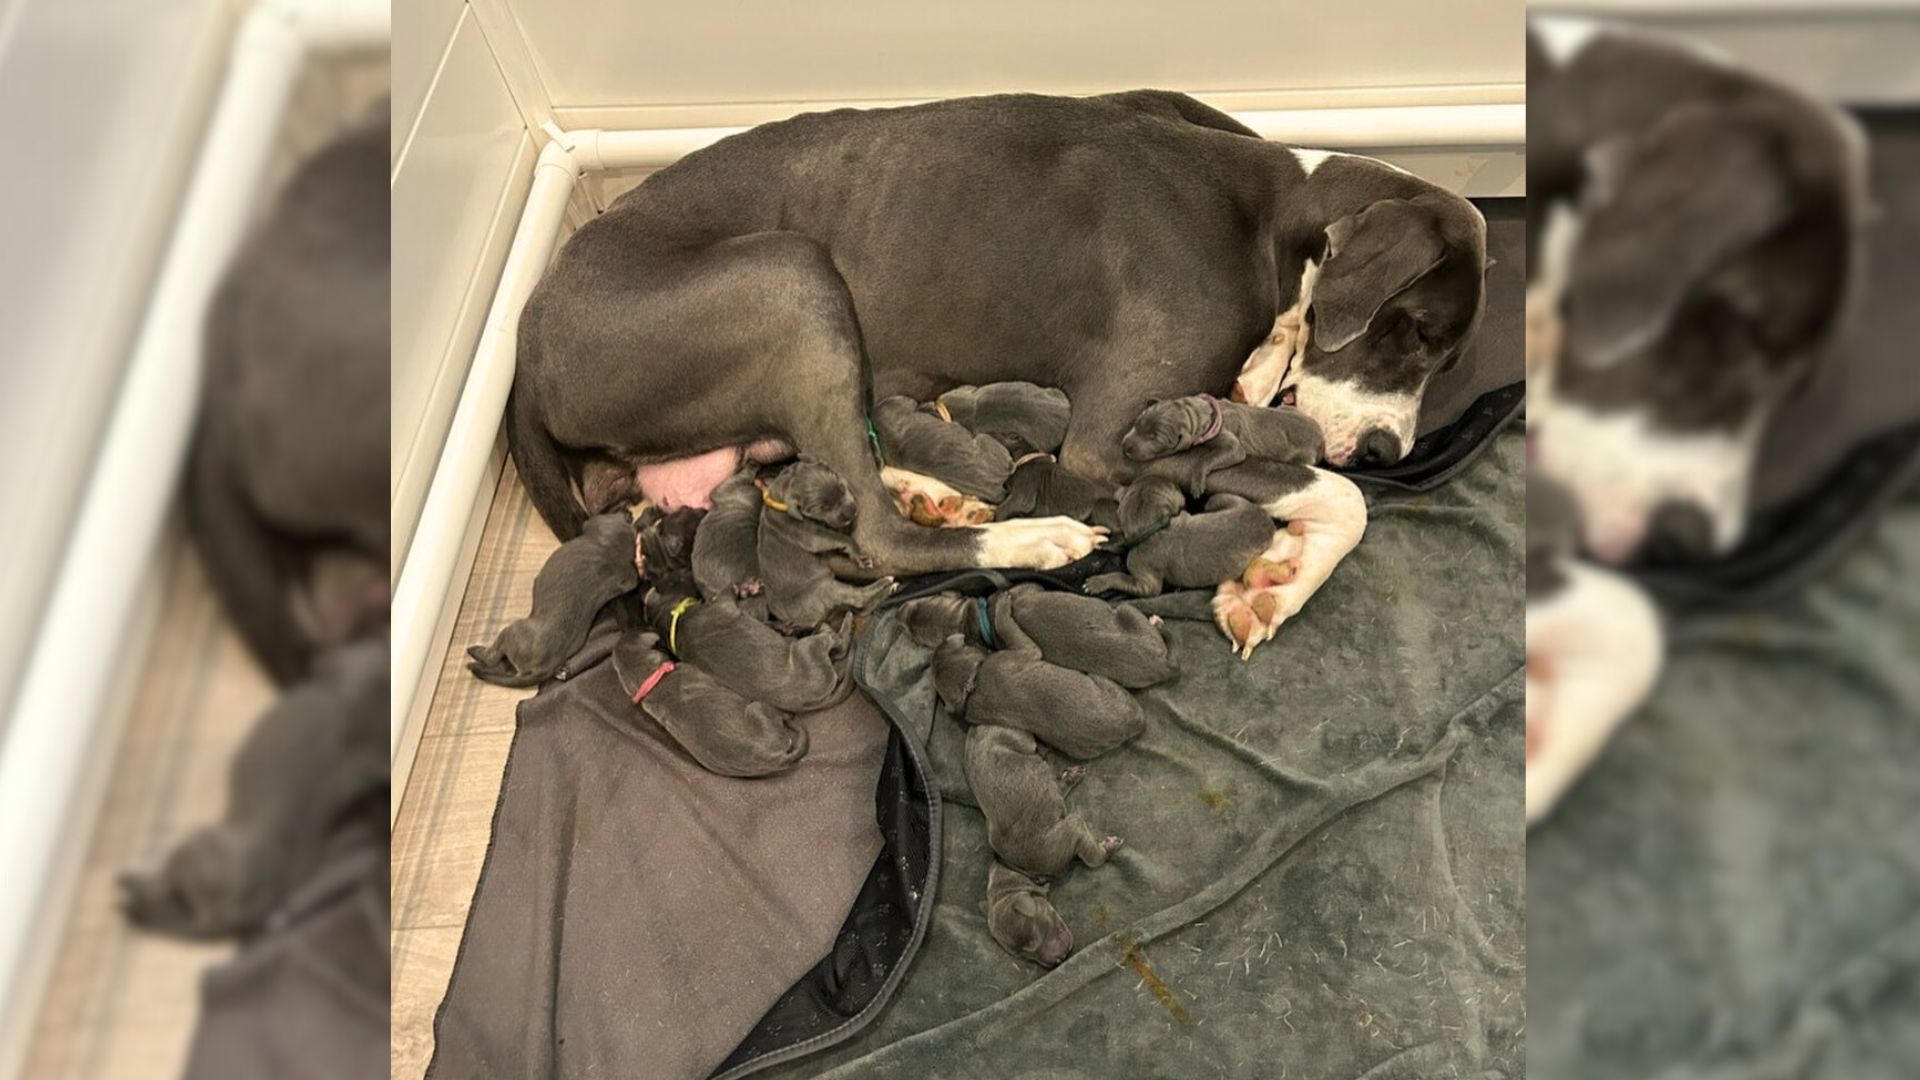 Amazing Great Dane Sets Record At North Carolina Rescue With 15 Babies